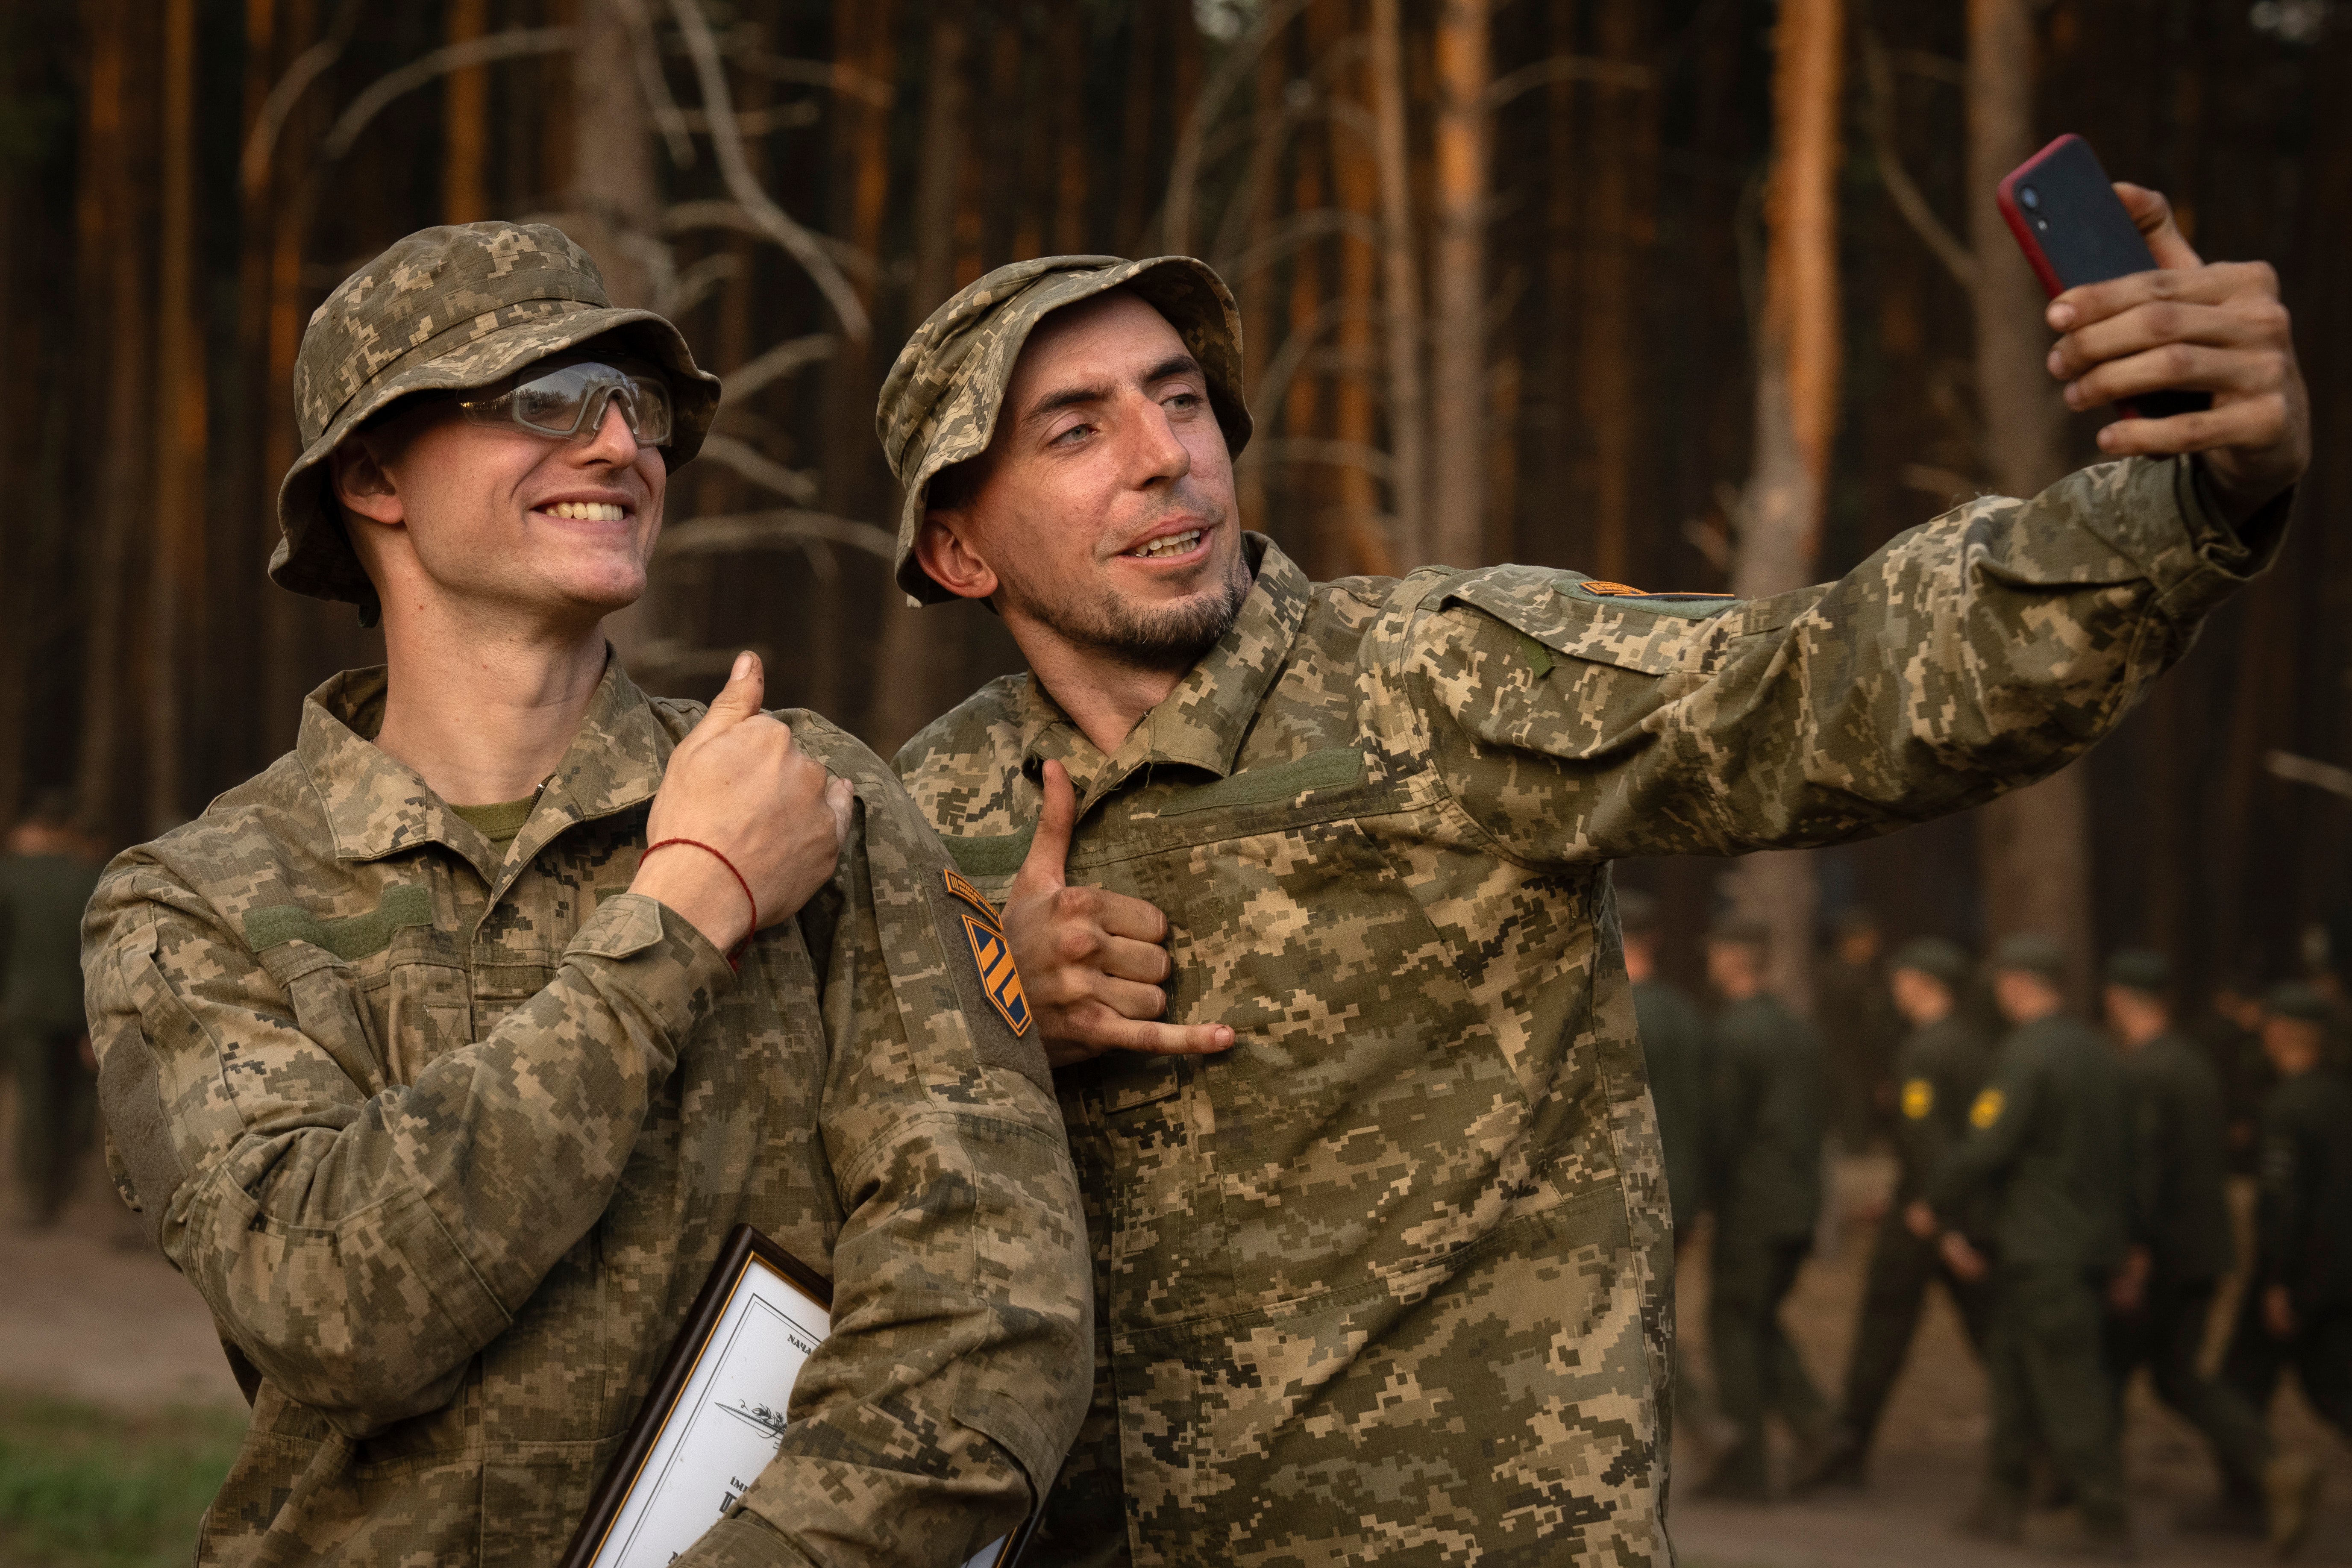 Newly recruited soldiers of the 3rd assault brigade take selfie to mark the end of their training